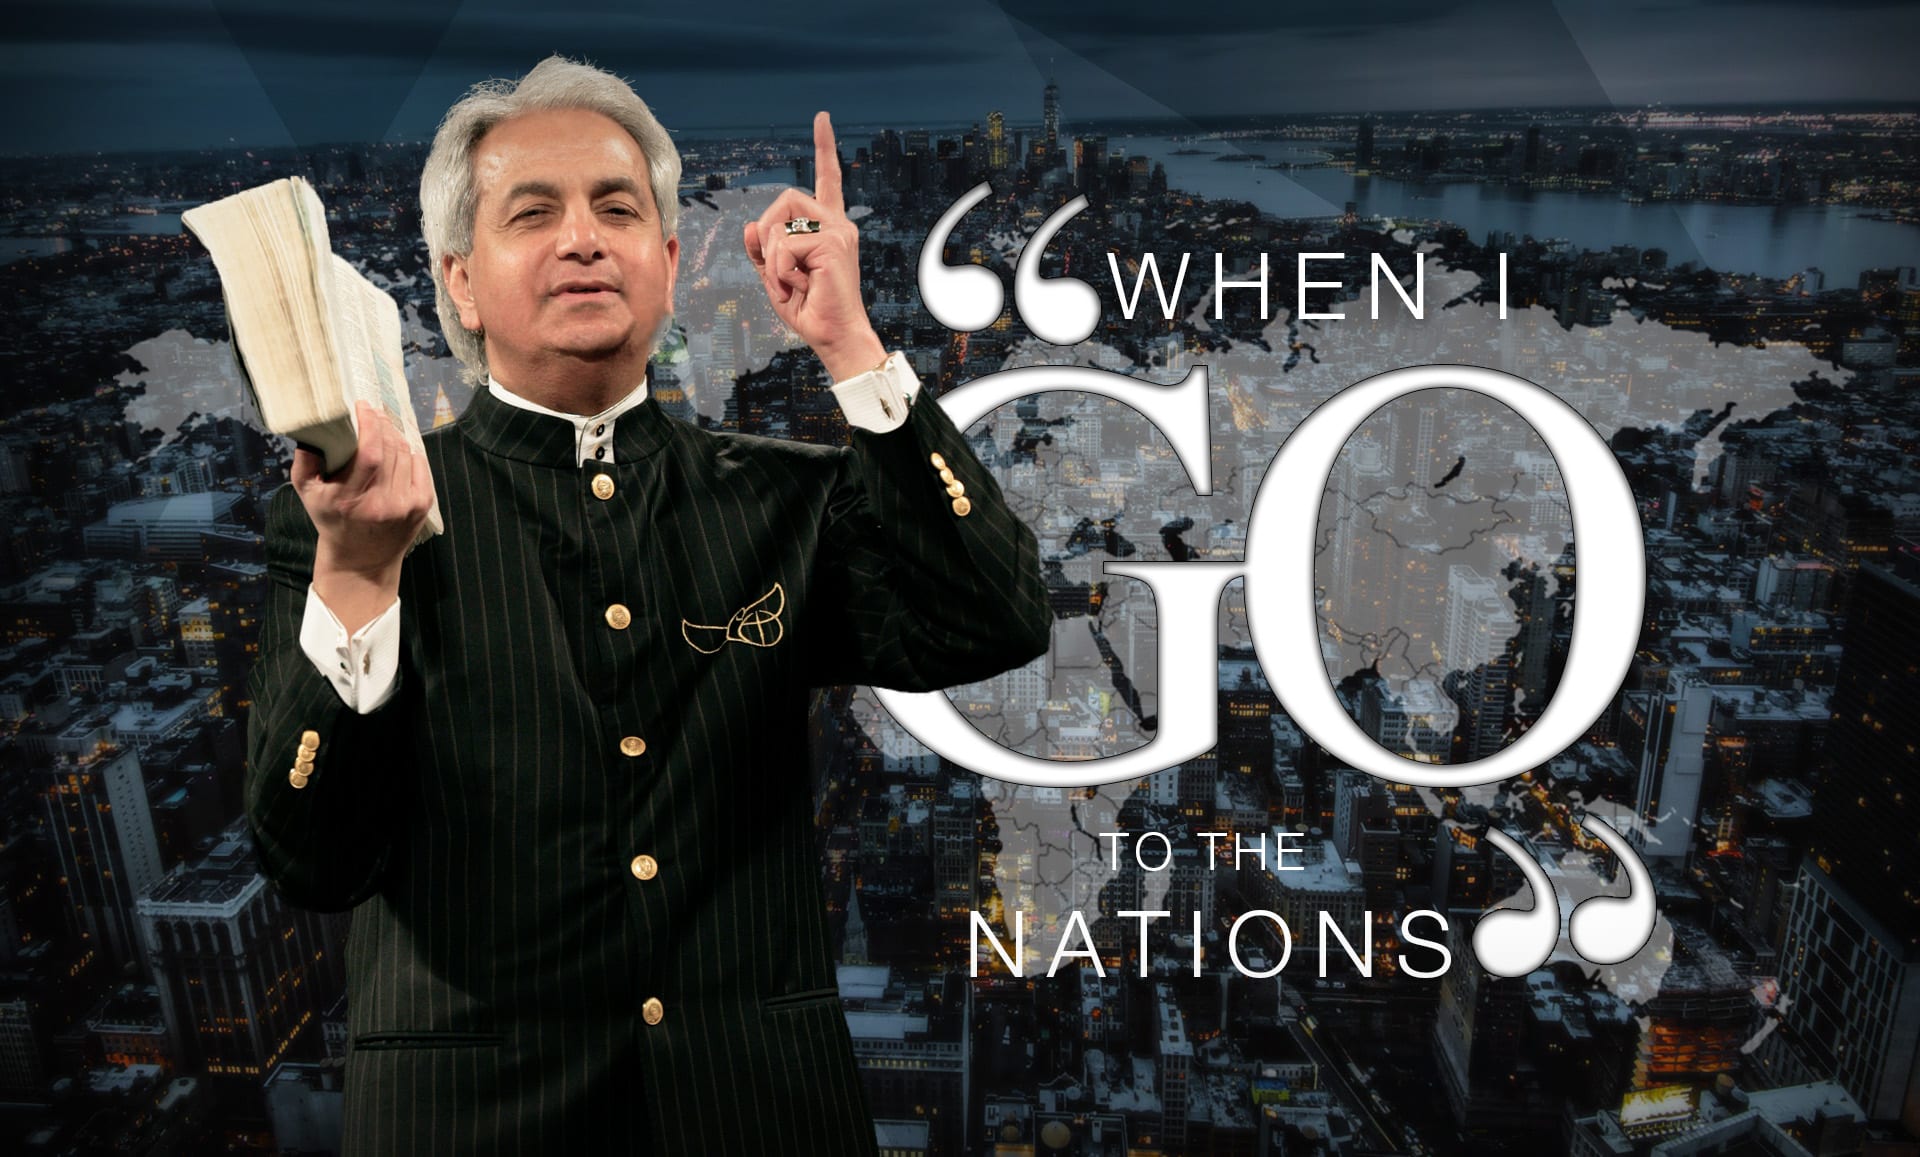 Go to the Nations